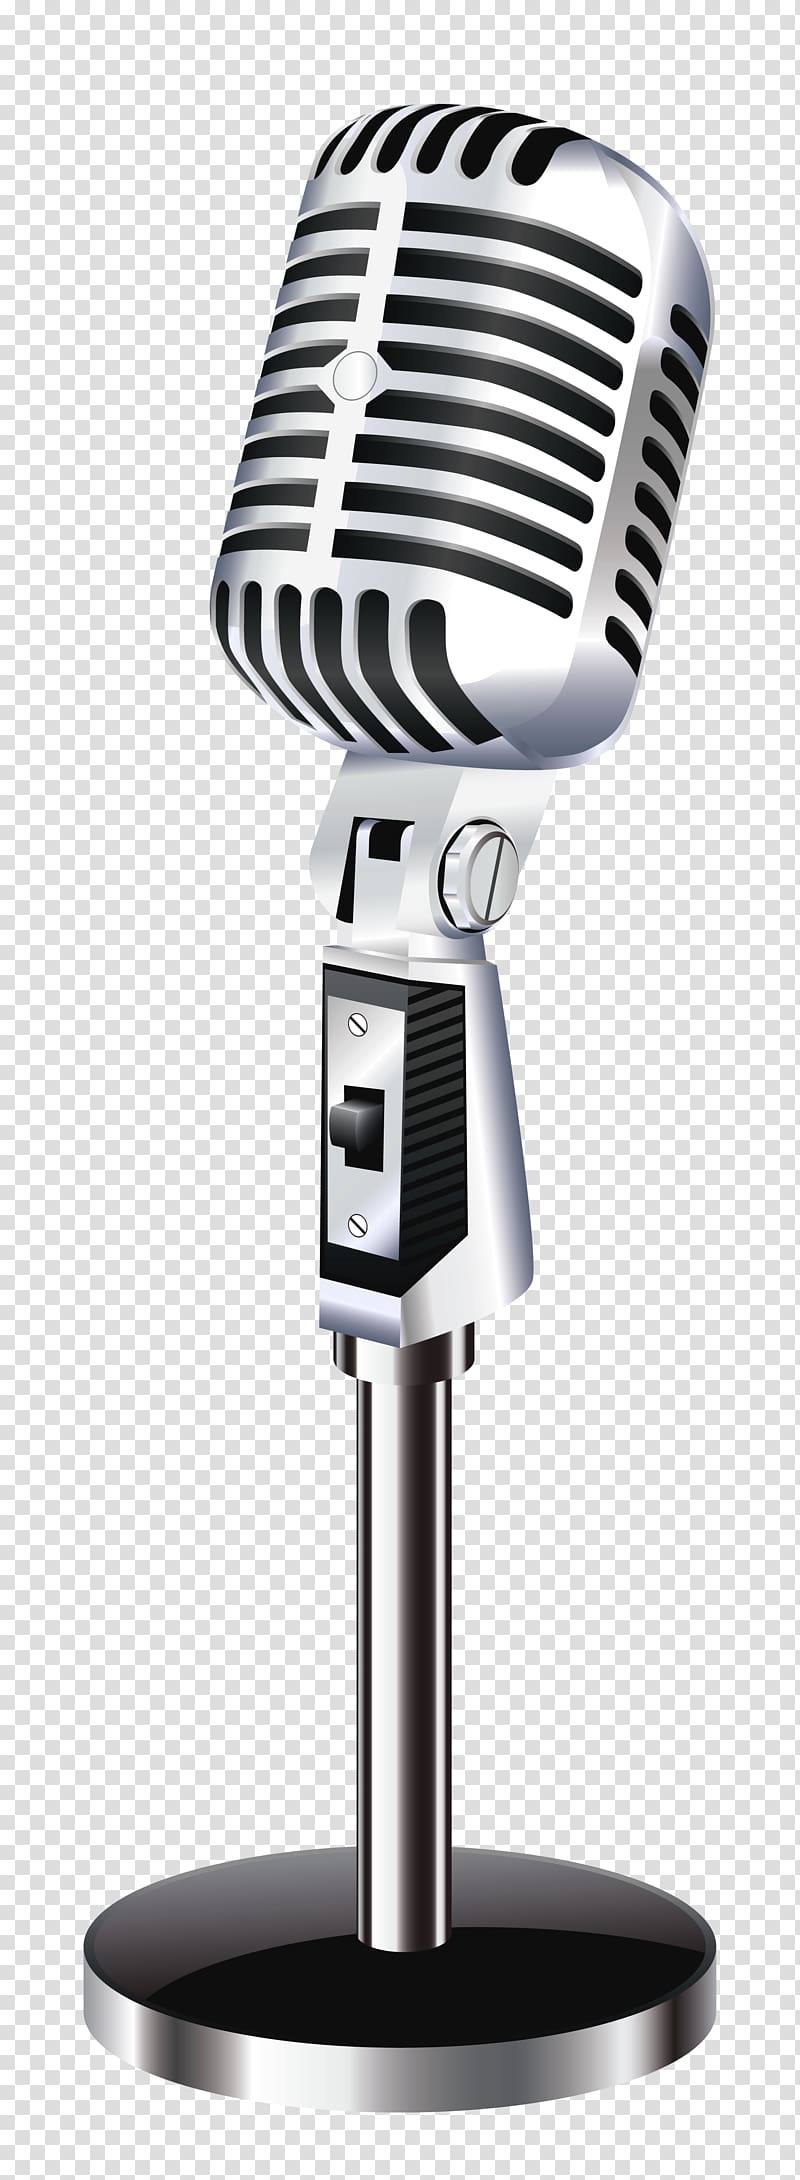 Microphone, Retro Microphone , silver condenser microphone transparent background PNG clipart